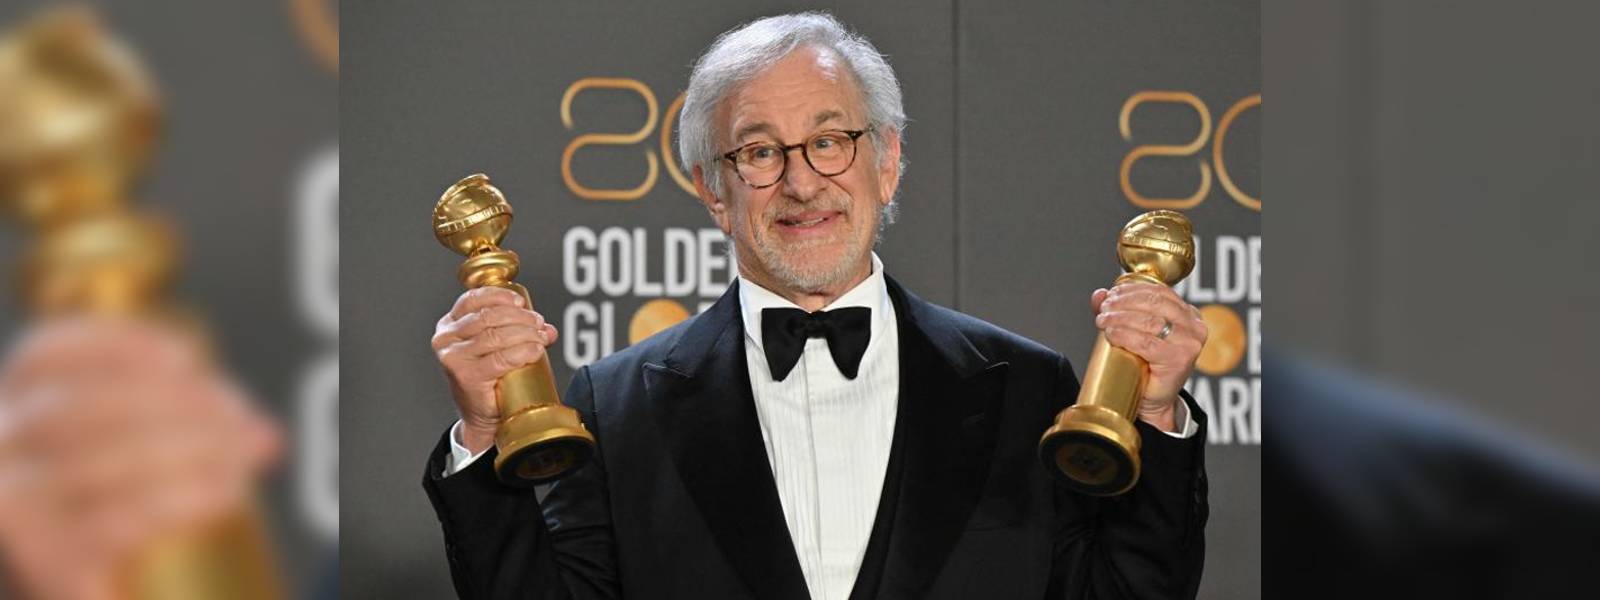 Spielberg strikes again at the Golden Globes